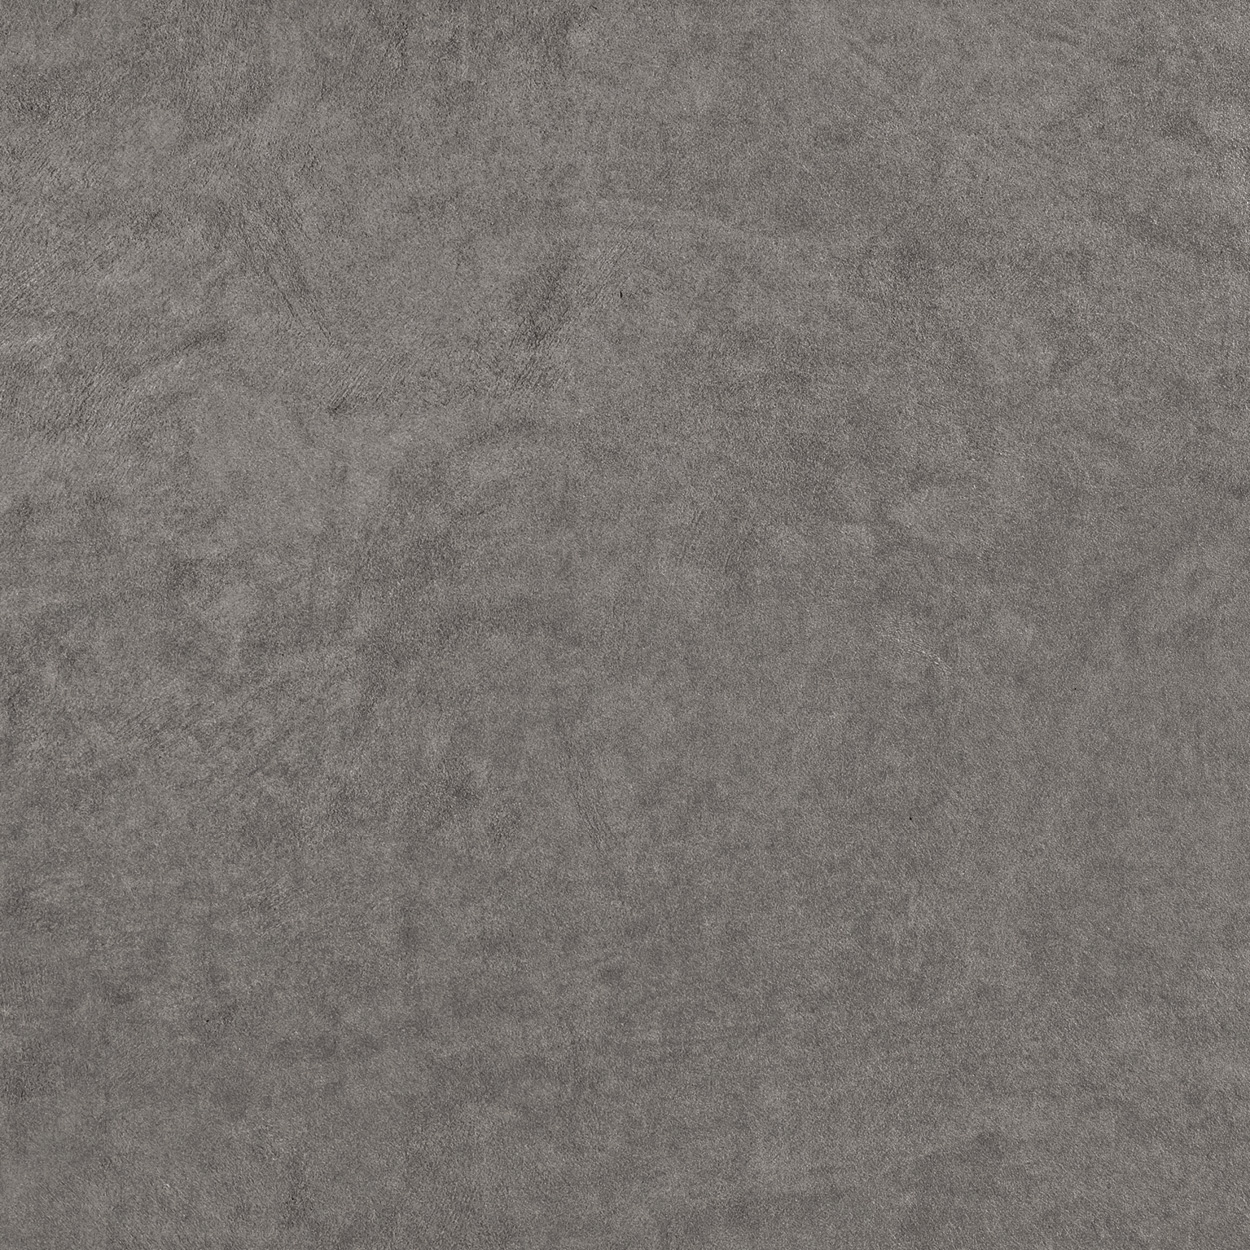 32 x 32 Seamless CL_02 Porcelain tile (SPECIAL ORDER ONLY)